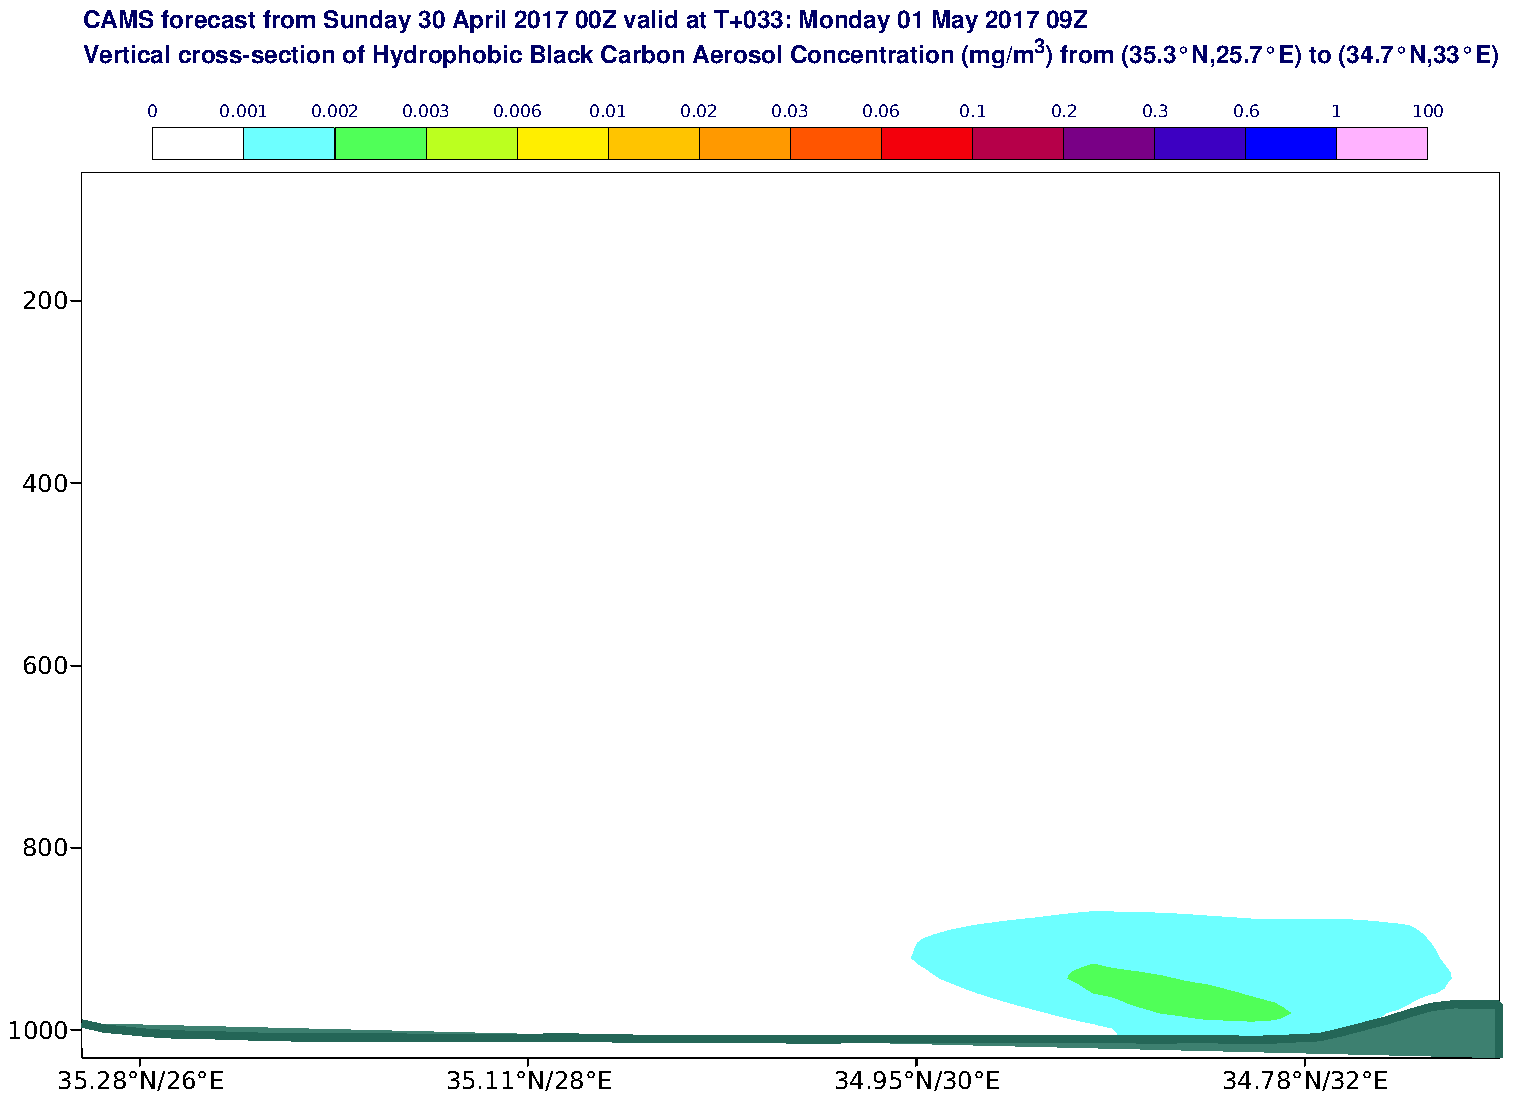 Vertical cross-section of Hydrophobic Black Carbon Aerosol Concentration (mg/m3) valid at T33 - 2017-05-01 09:00